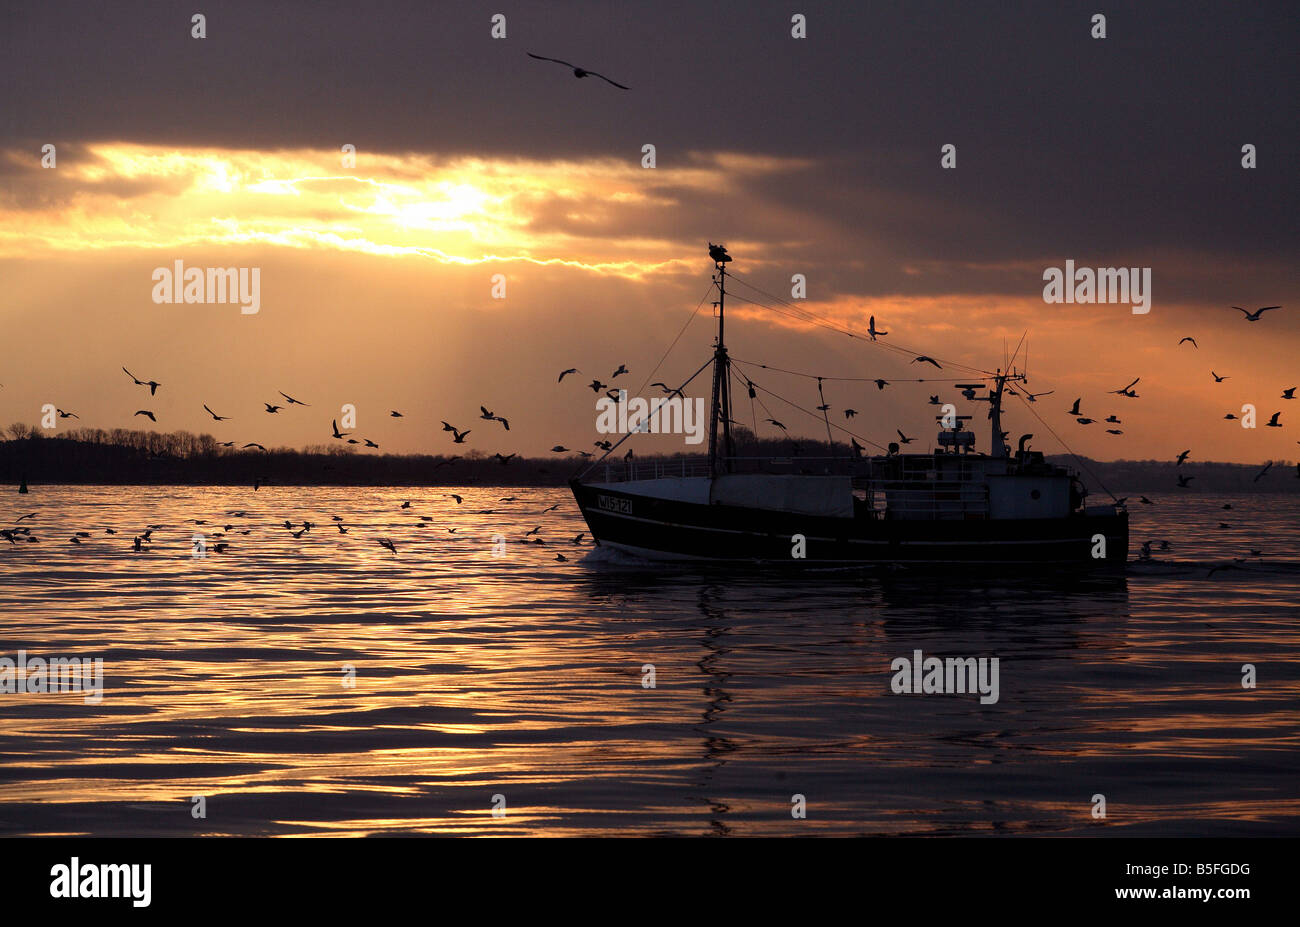 Fishing ship and seagulls at a sunset, Wismar, Germany Stock Photo